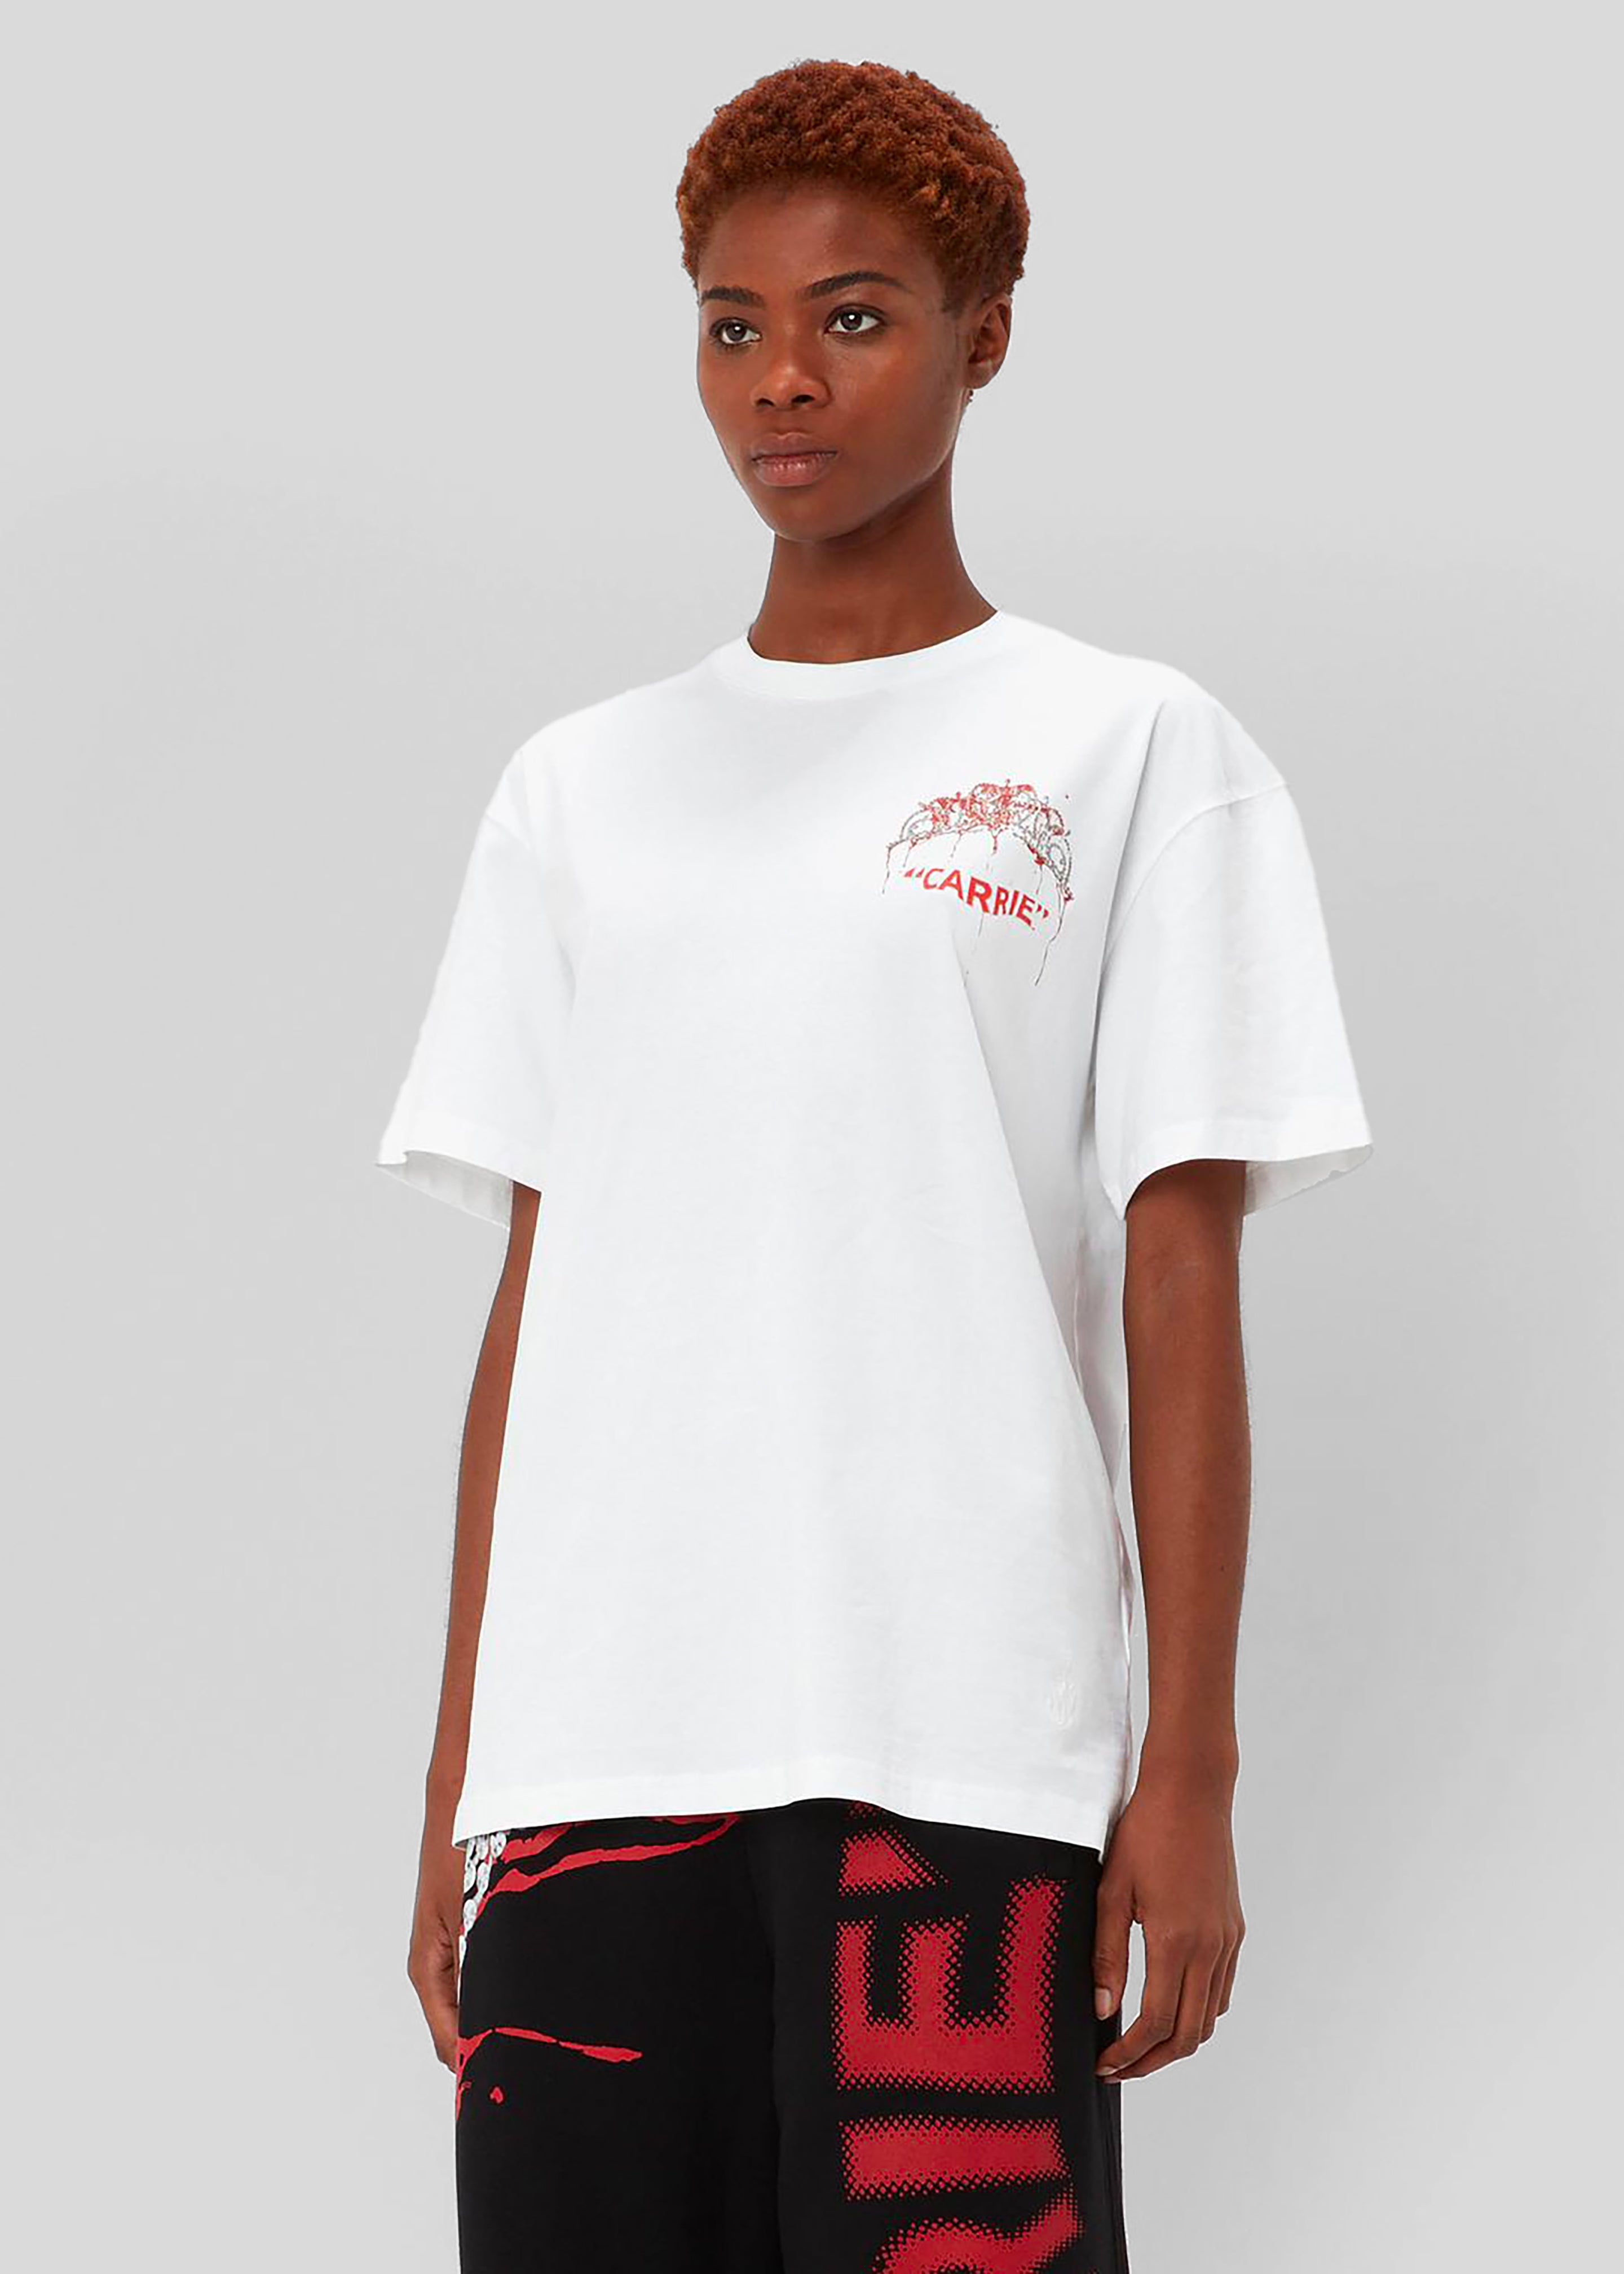 JW Anderson Carrie Tiara Chest Embroidery T-Shirt - White - 3